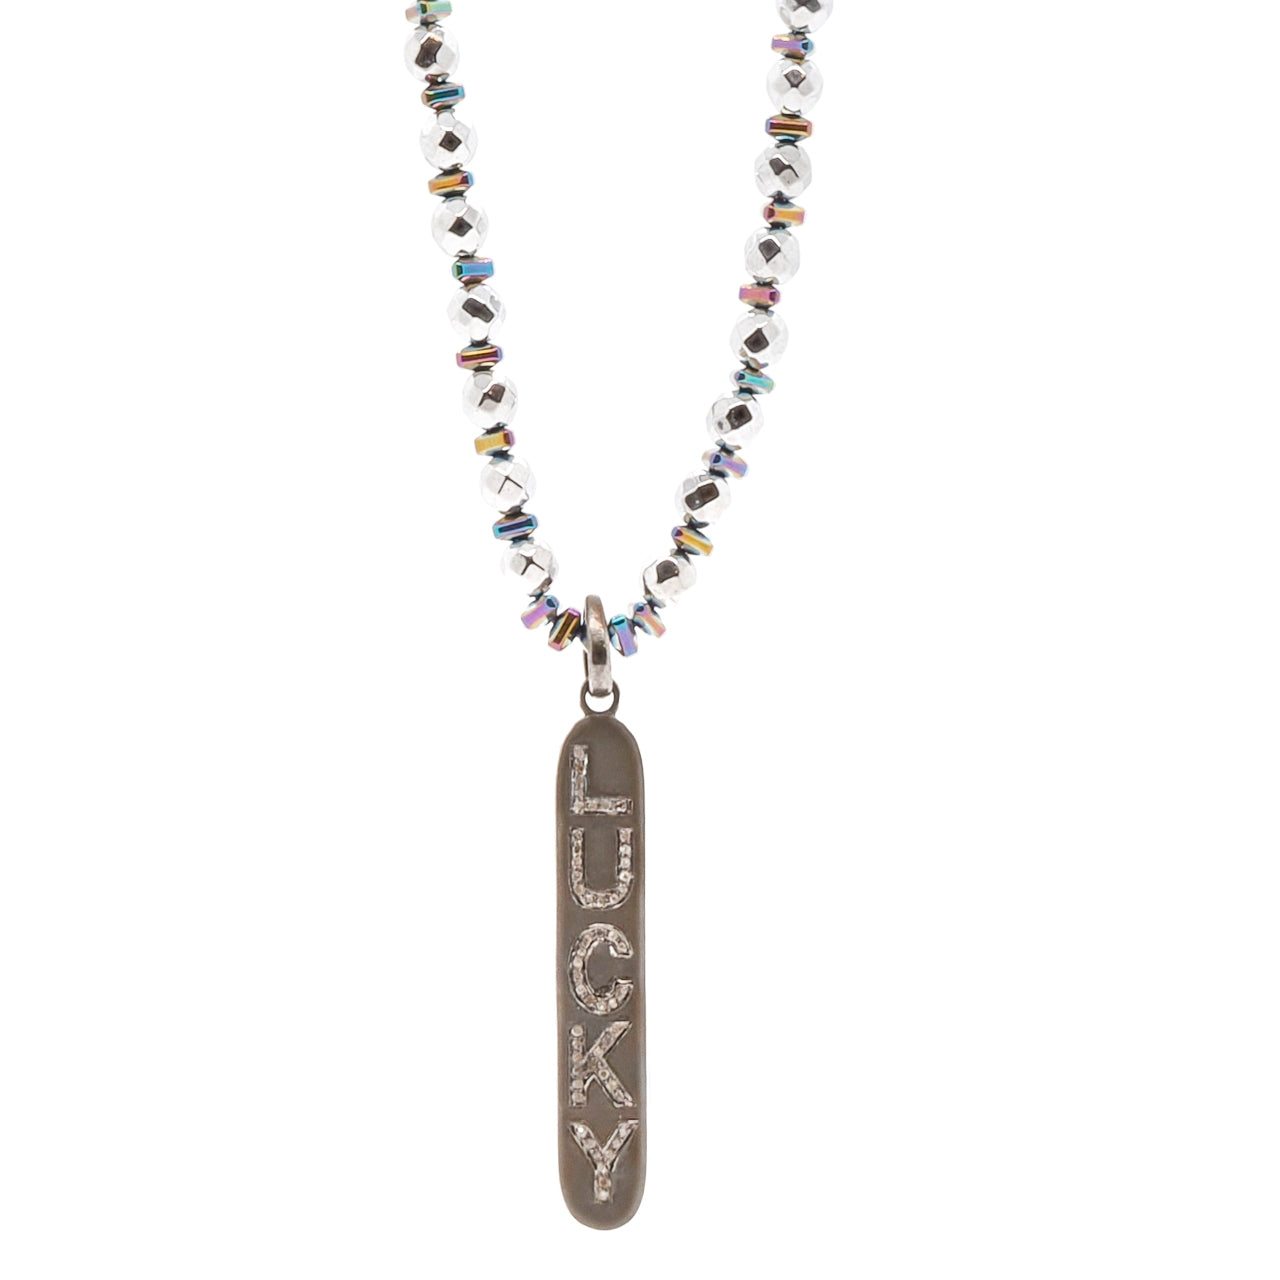 Light of Luck Diamond Necklace, a dazzling blend of silver hematite beads and a lucky charm pendant, radiating positive energy and style.